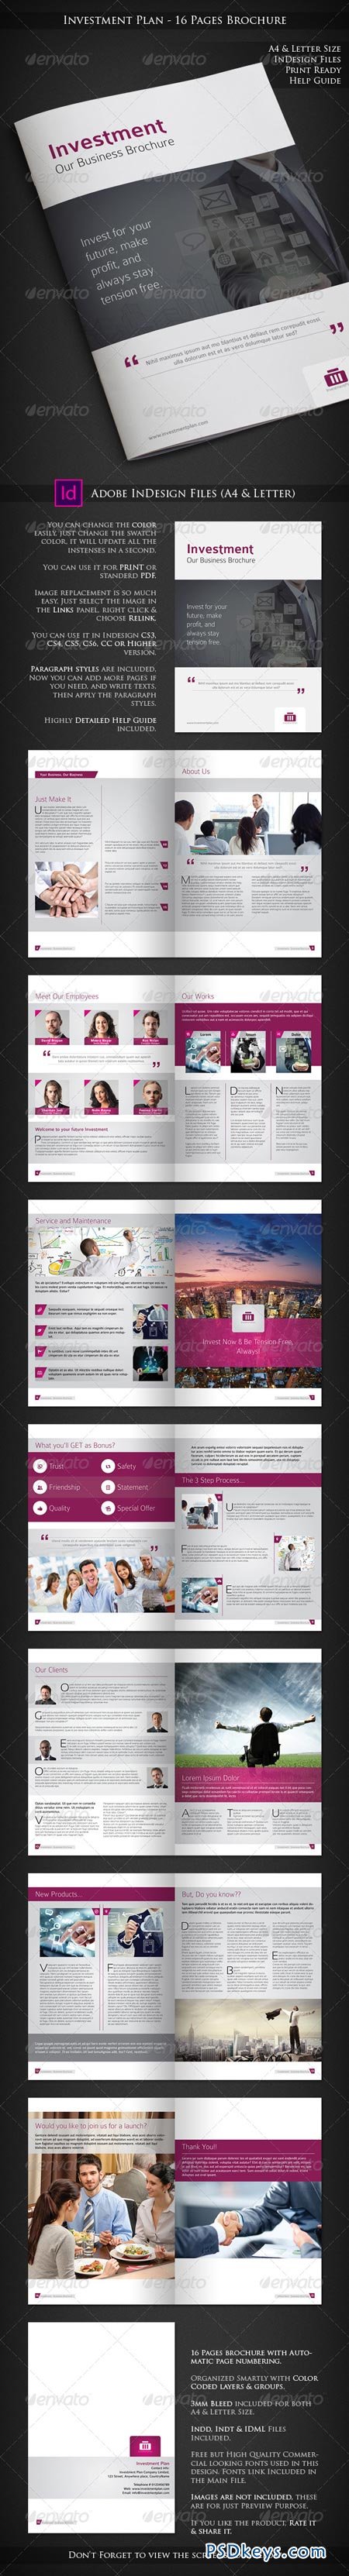 Investment Plan - 16 Pages Business Brochure 6603457